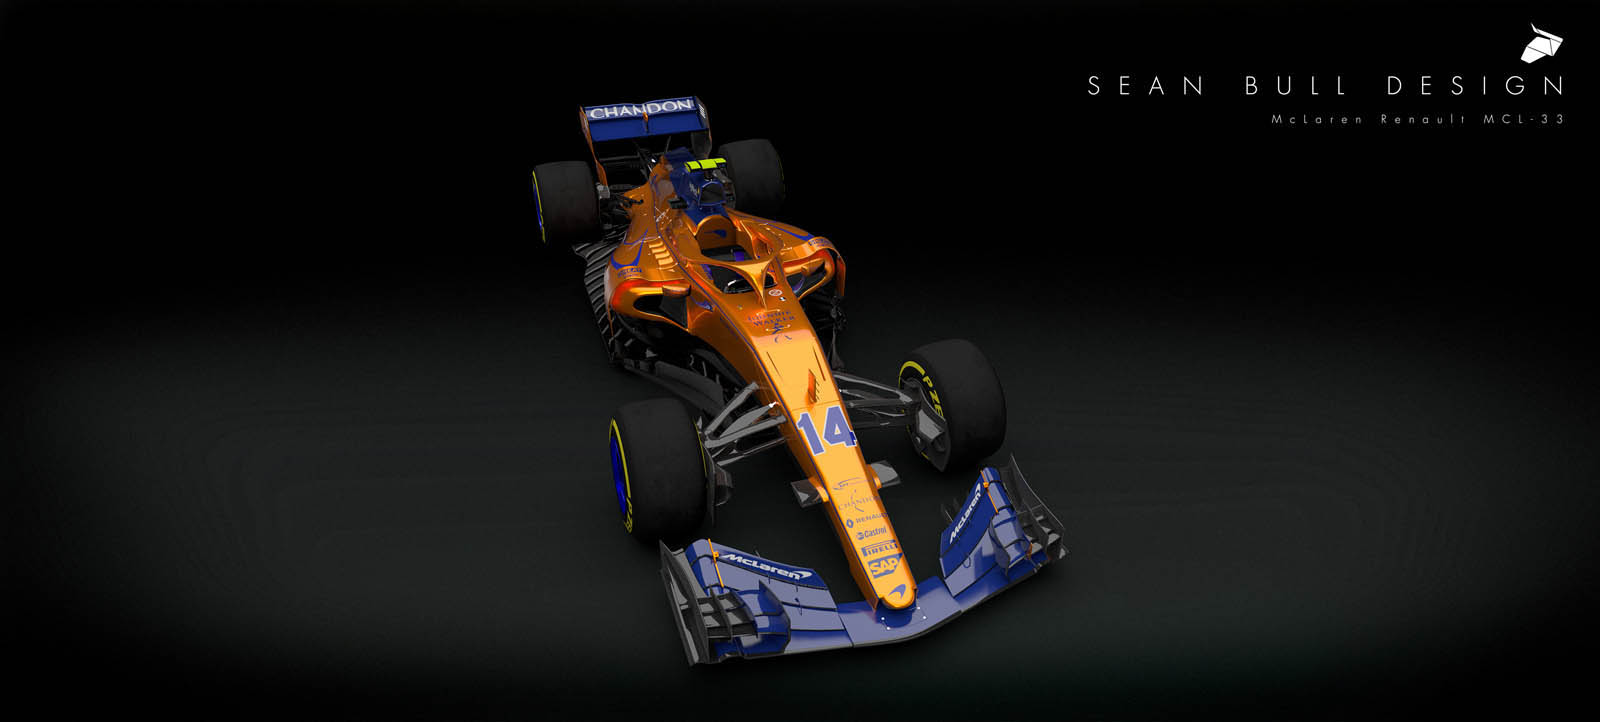 Maybe The Mclaren Renault Mcl33 Will Actually Win